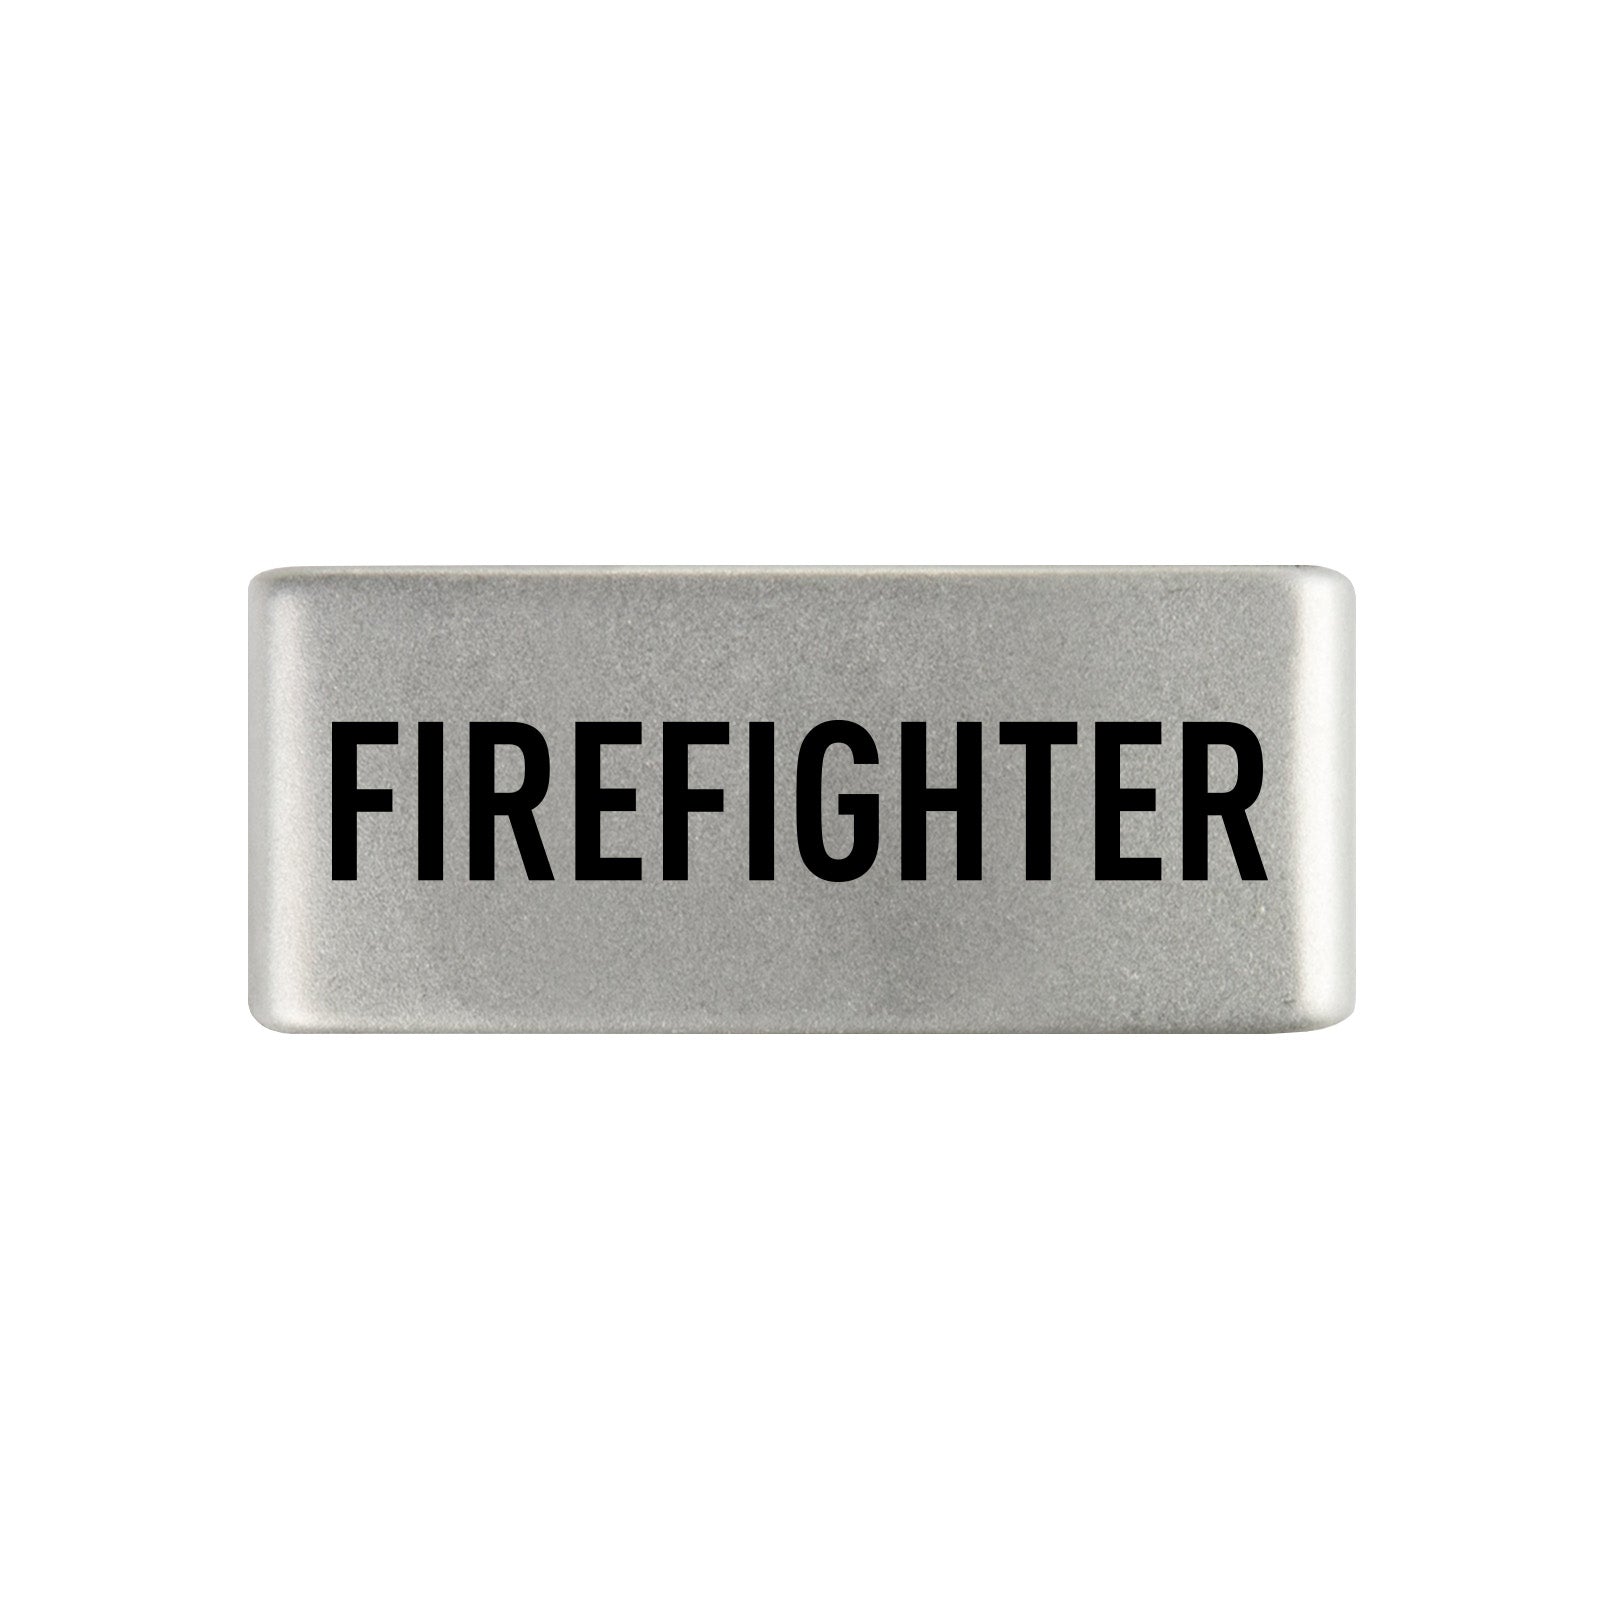 Firefighter Badge Badge 13mm - ROAD iD